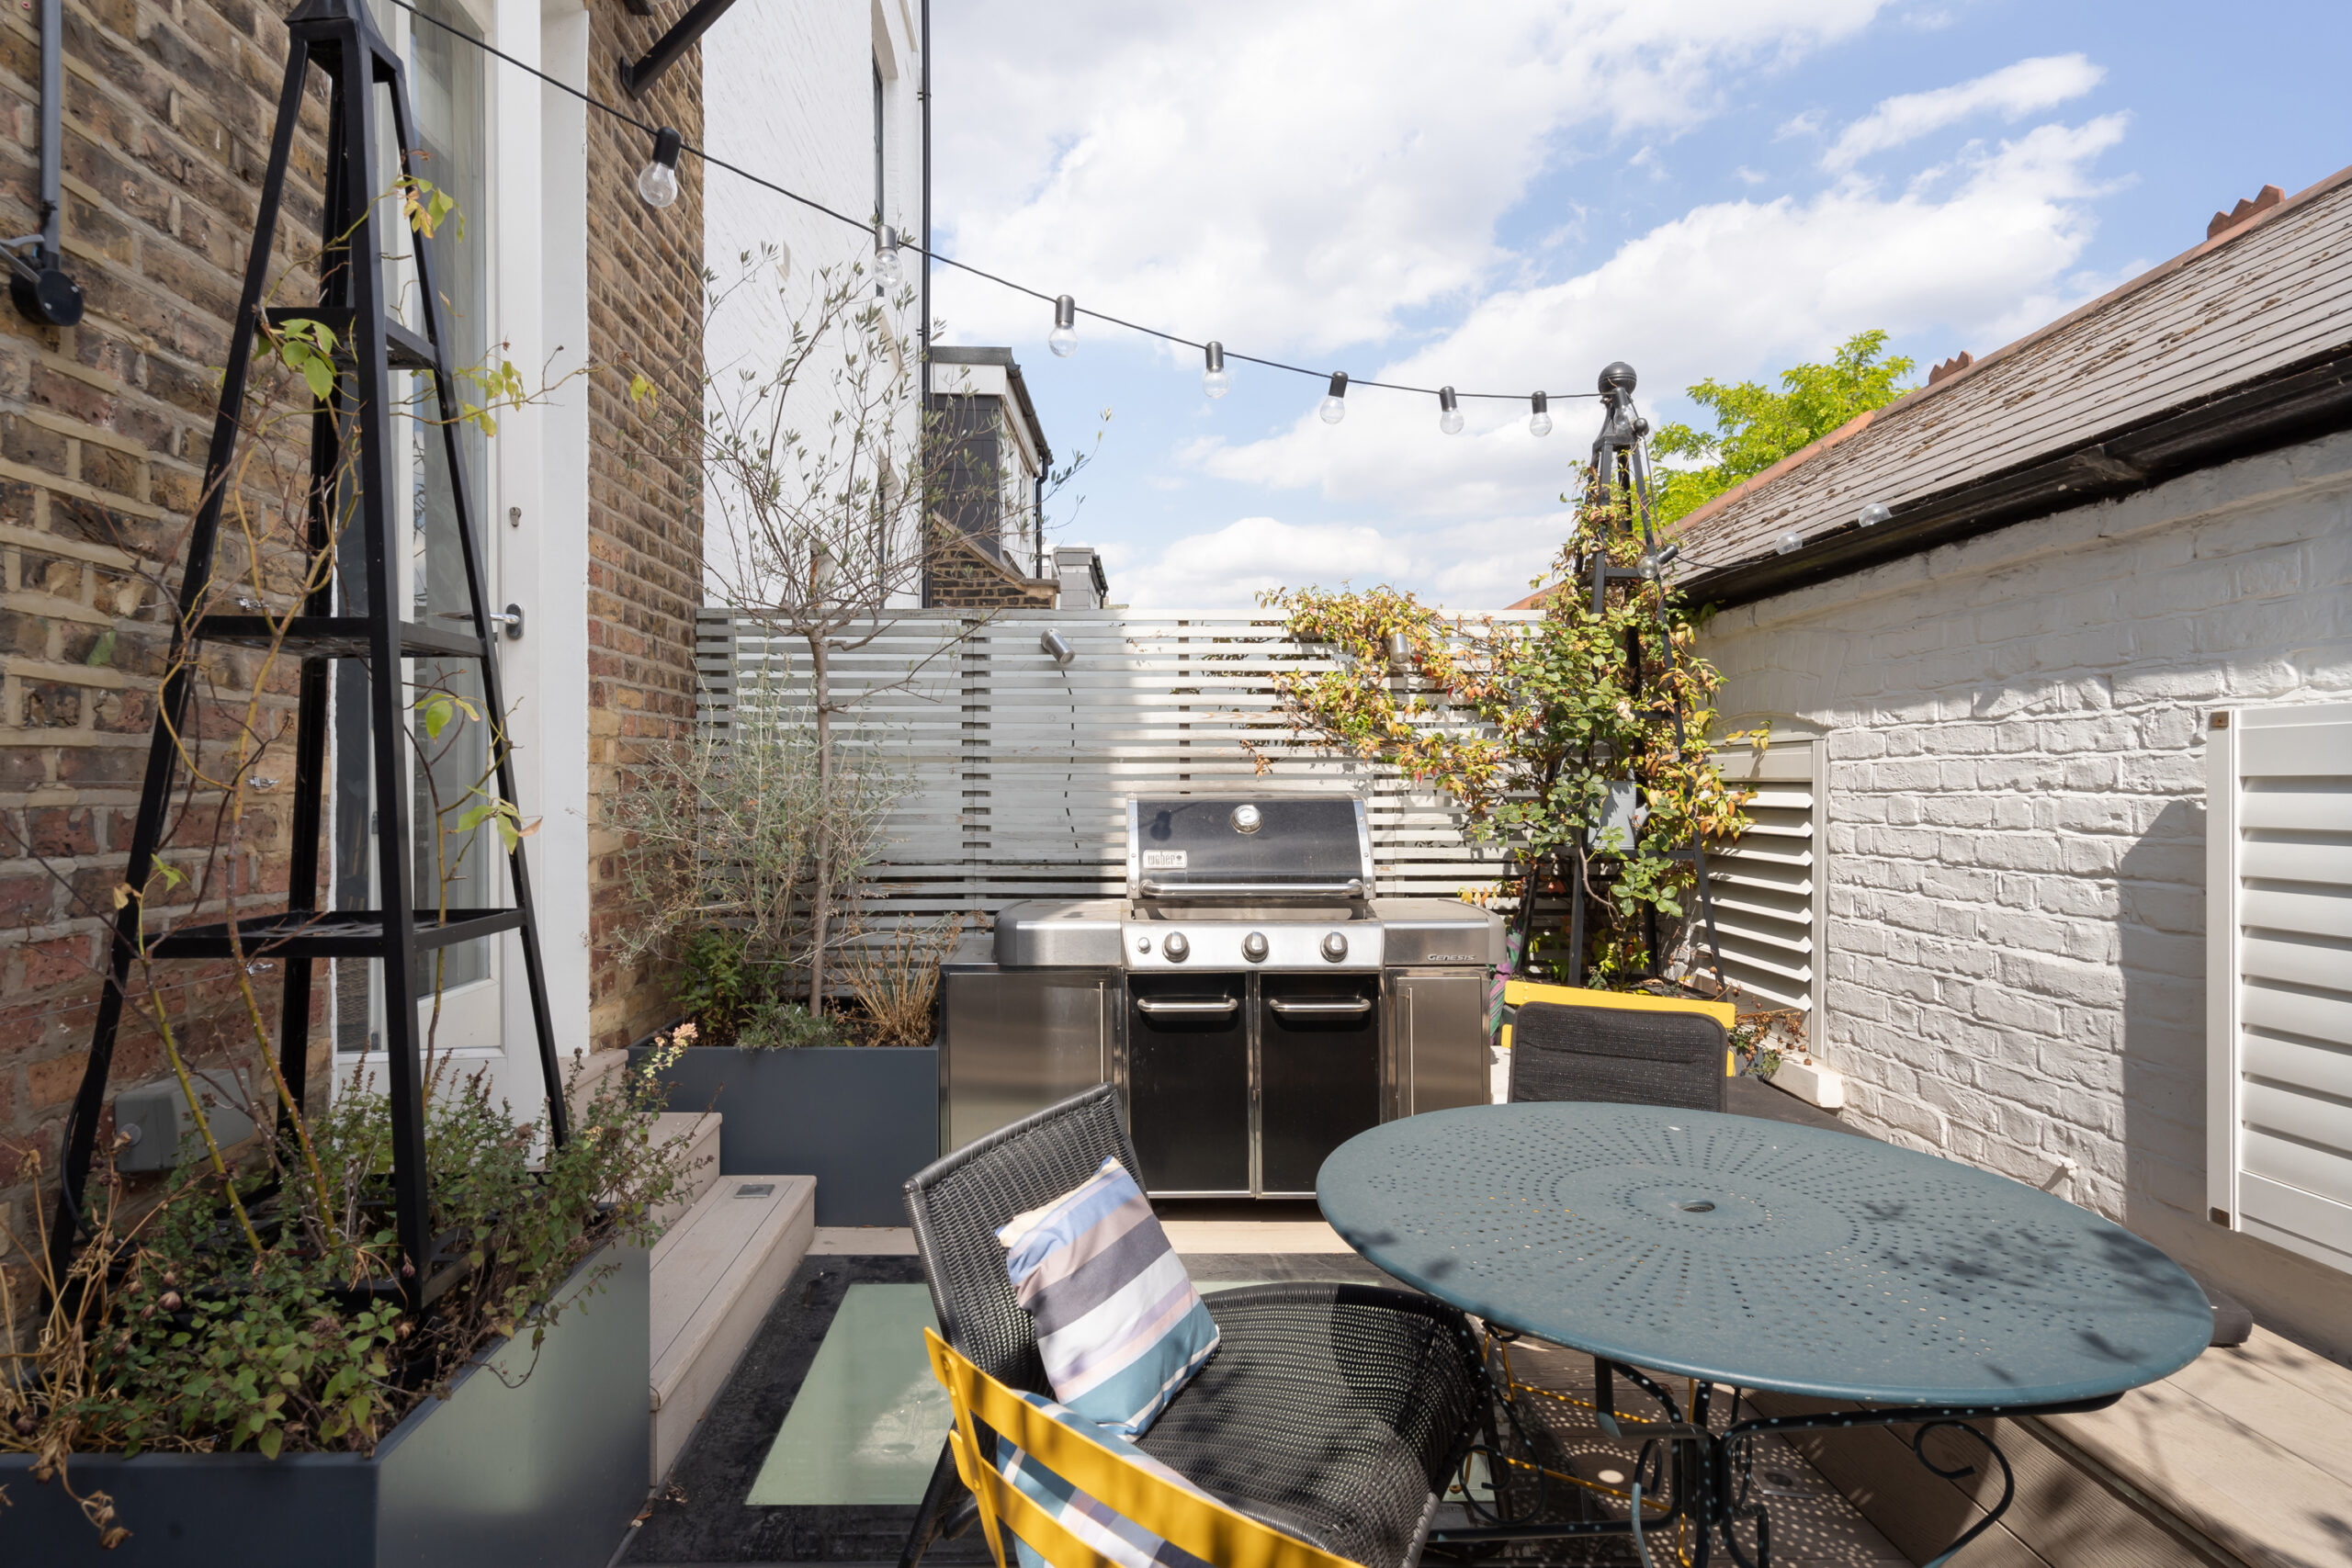 Well Road roof terrace with outdoors kitchen